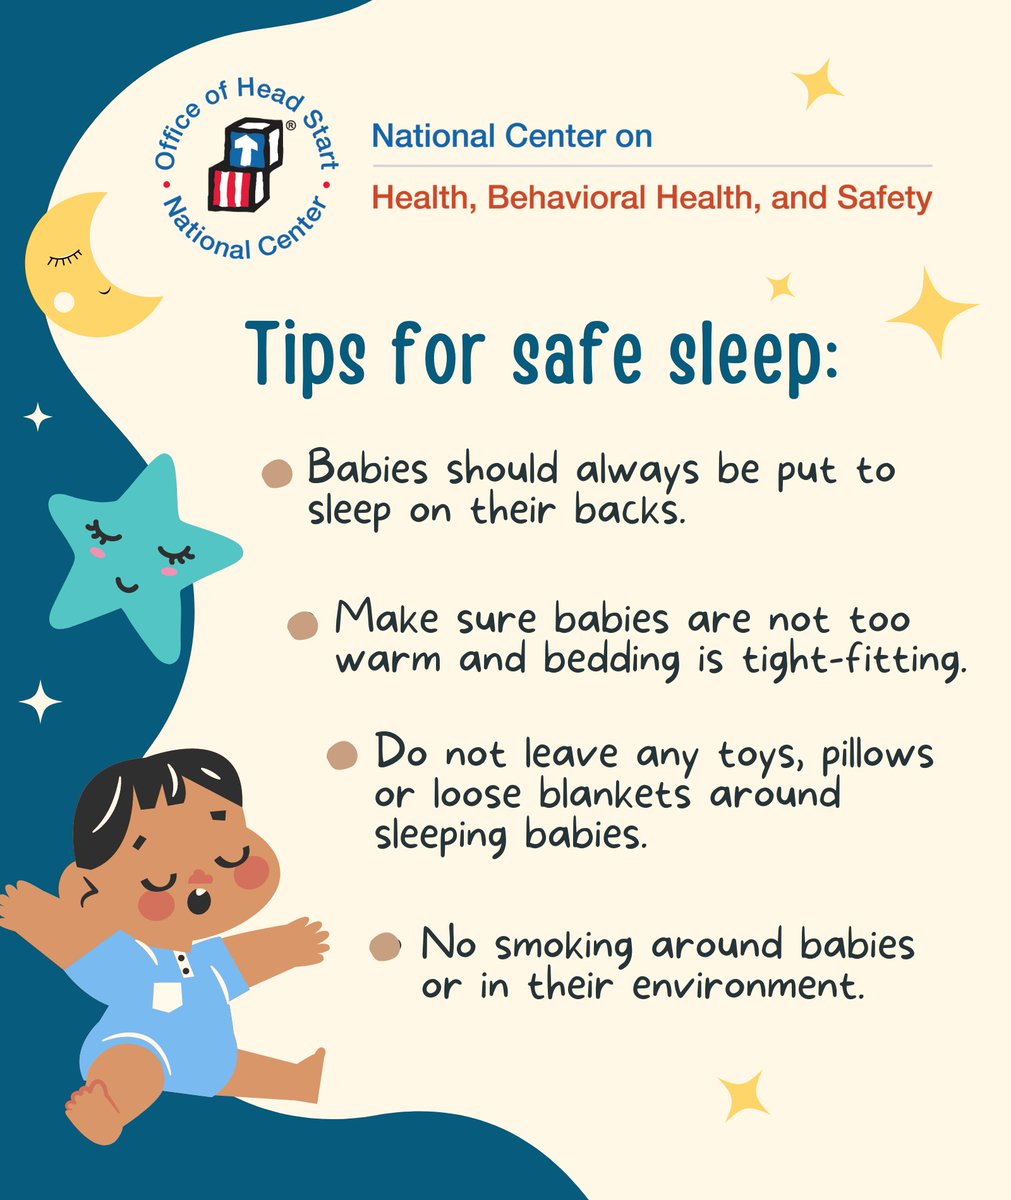 Simple steps for safe sleep — Check out these tips to learn about infant sleep safety!

#SIDSAwarenessMonth